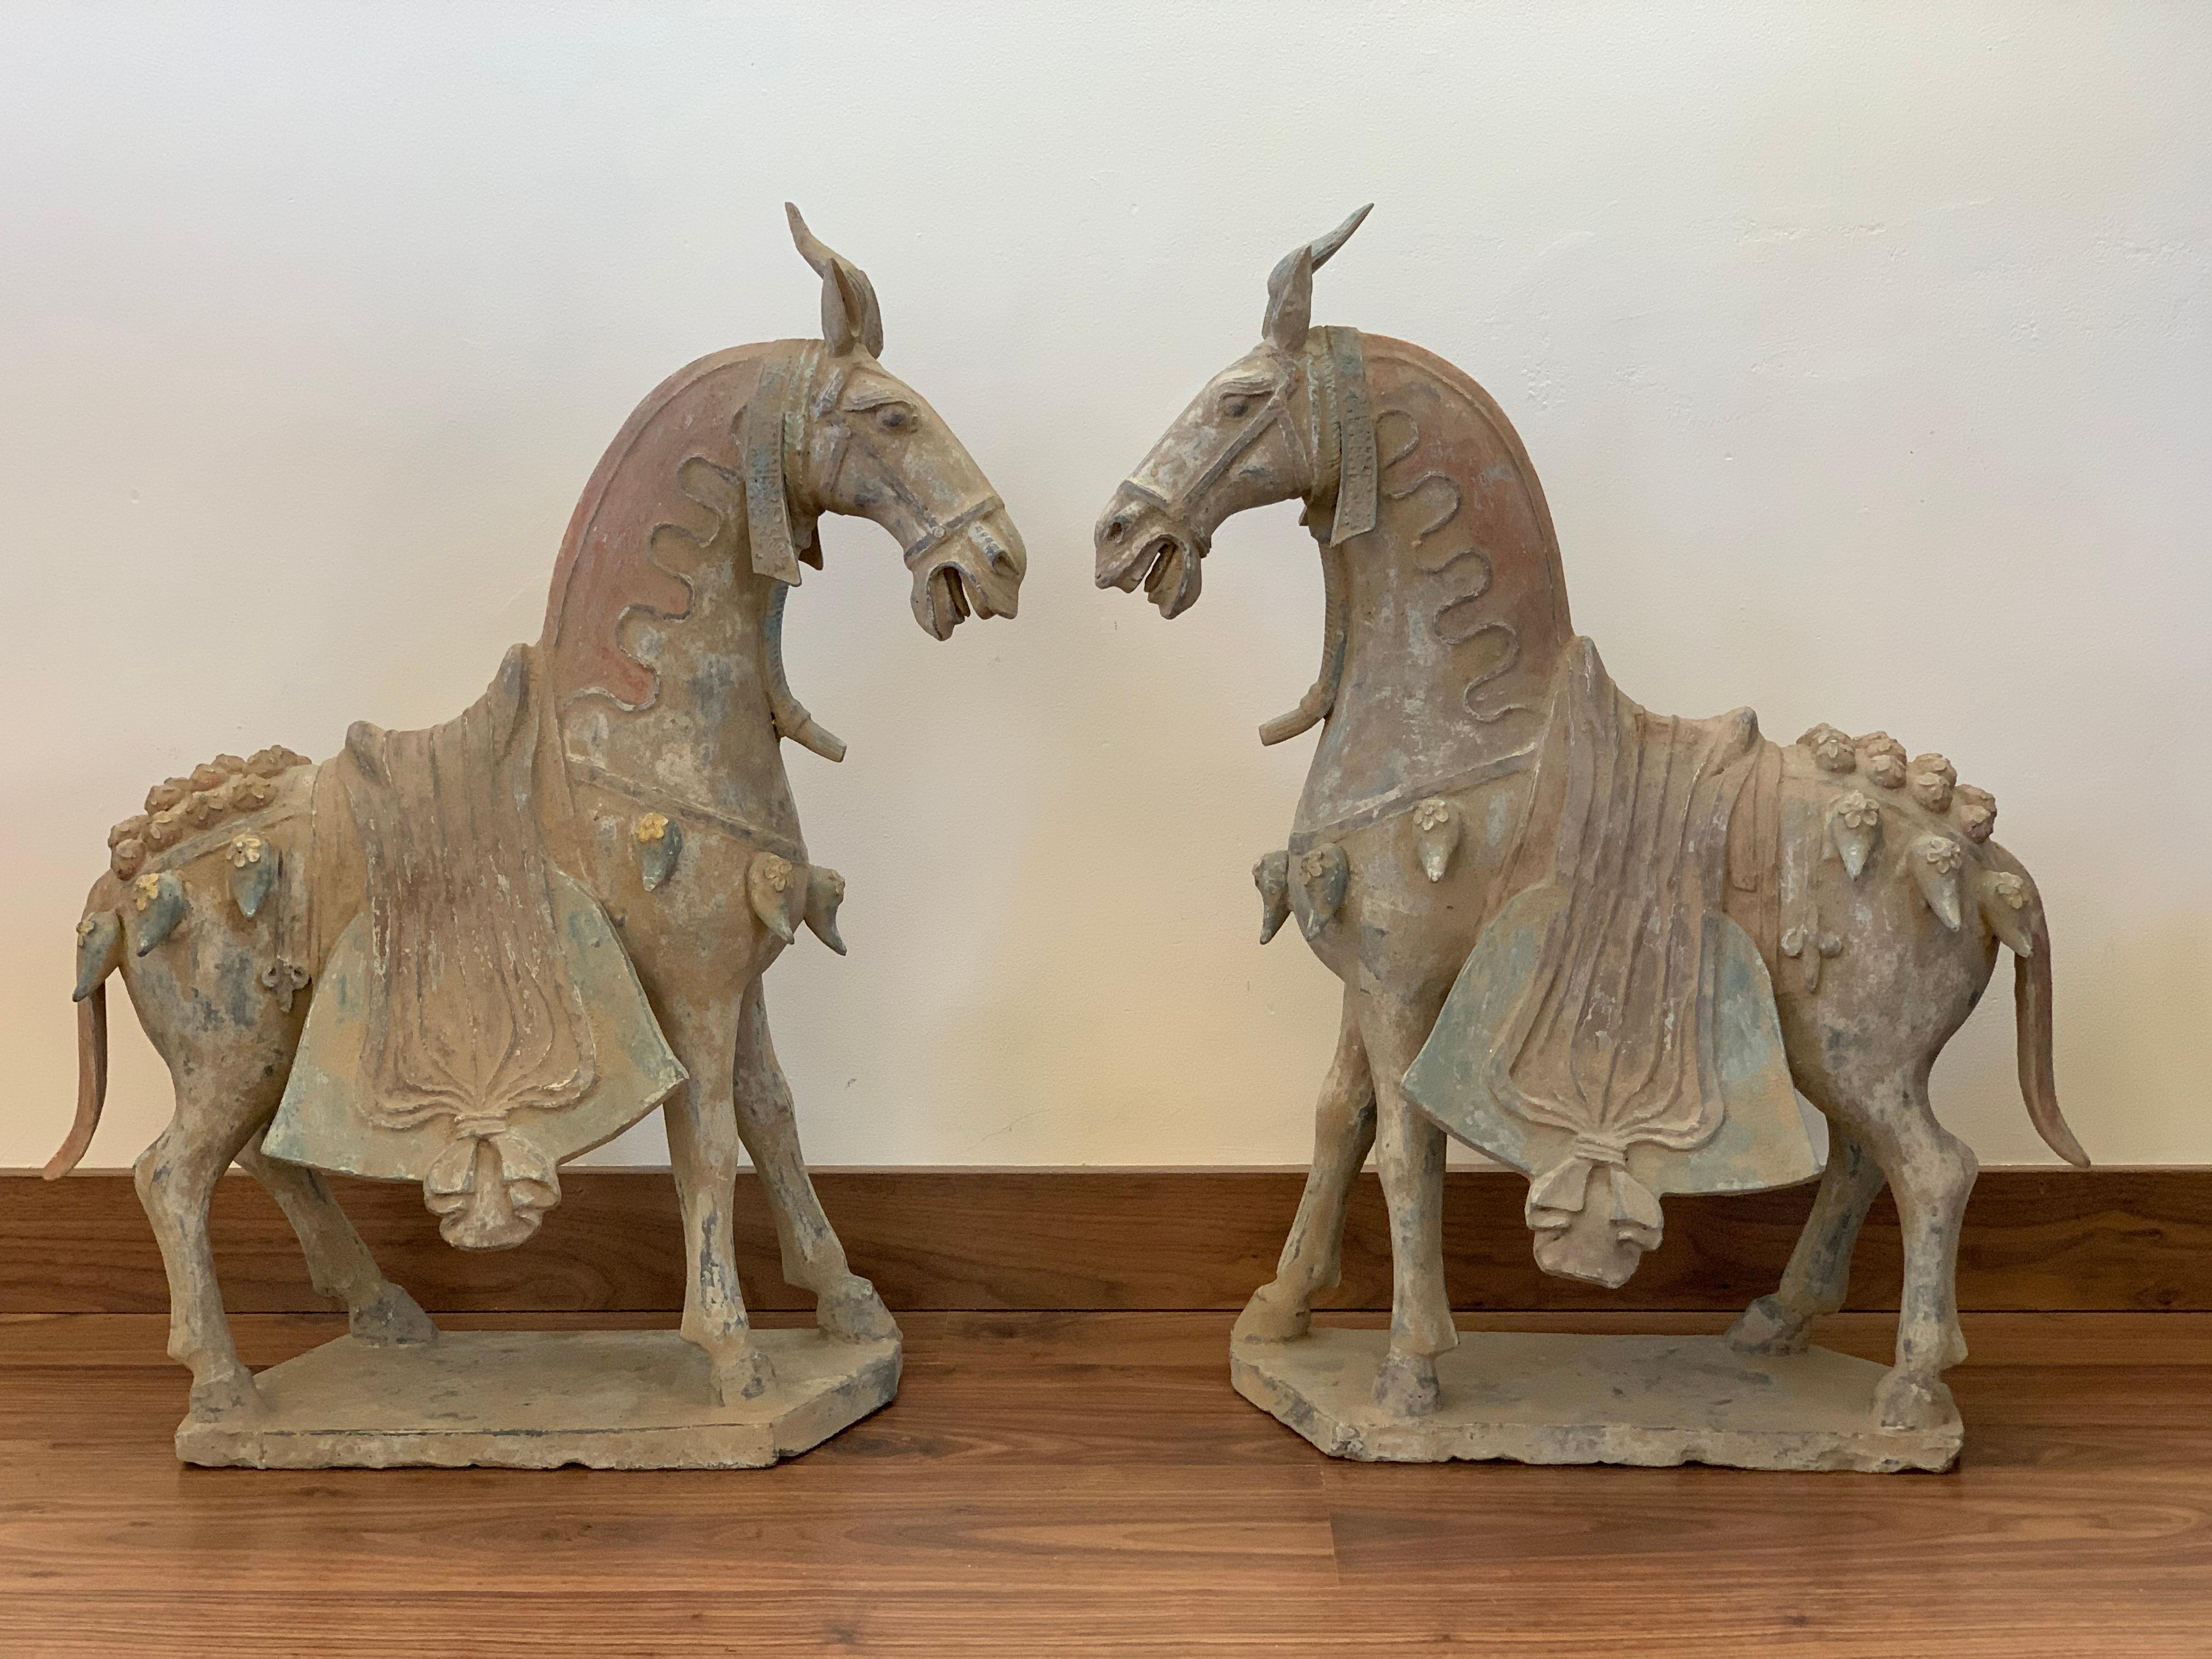 A massive pottery pair of horses standing on all fours and striding with its right hoof forward. Extended snout ends in parted lips showing teeth beneath in a braying attitude. Low relief bridle on face and well defined eyes. Raised mane down back